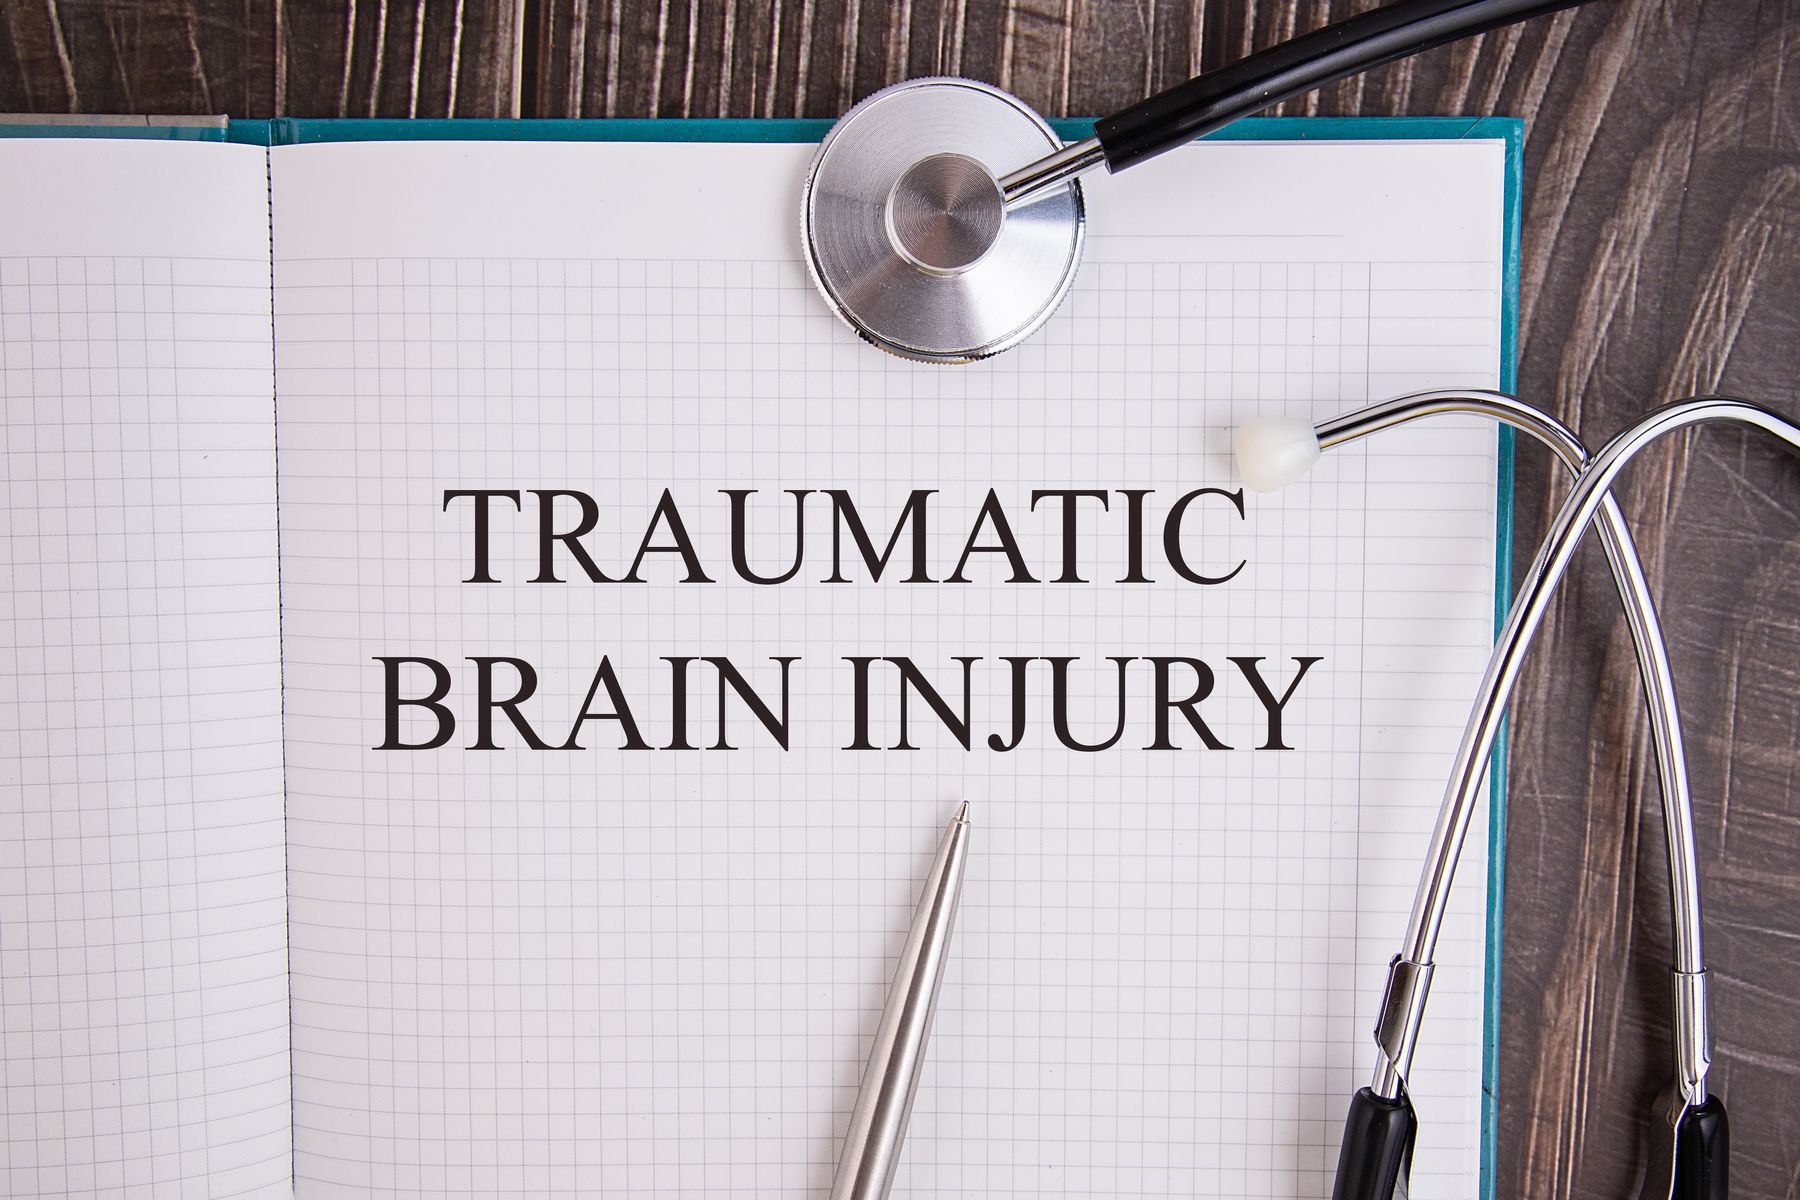 Brain Trauma Life-Altering Injuries Caused by Auto Accidents